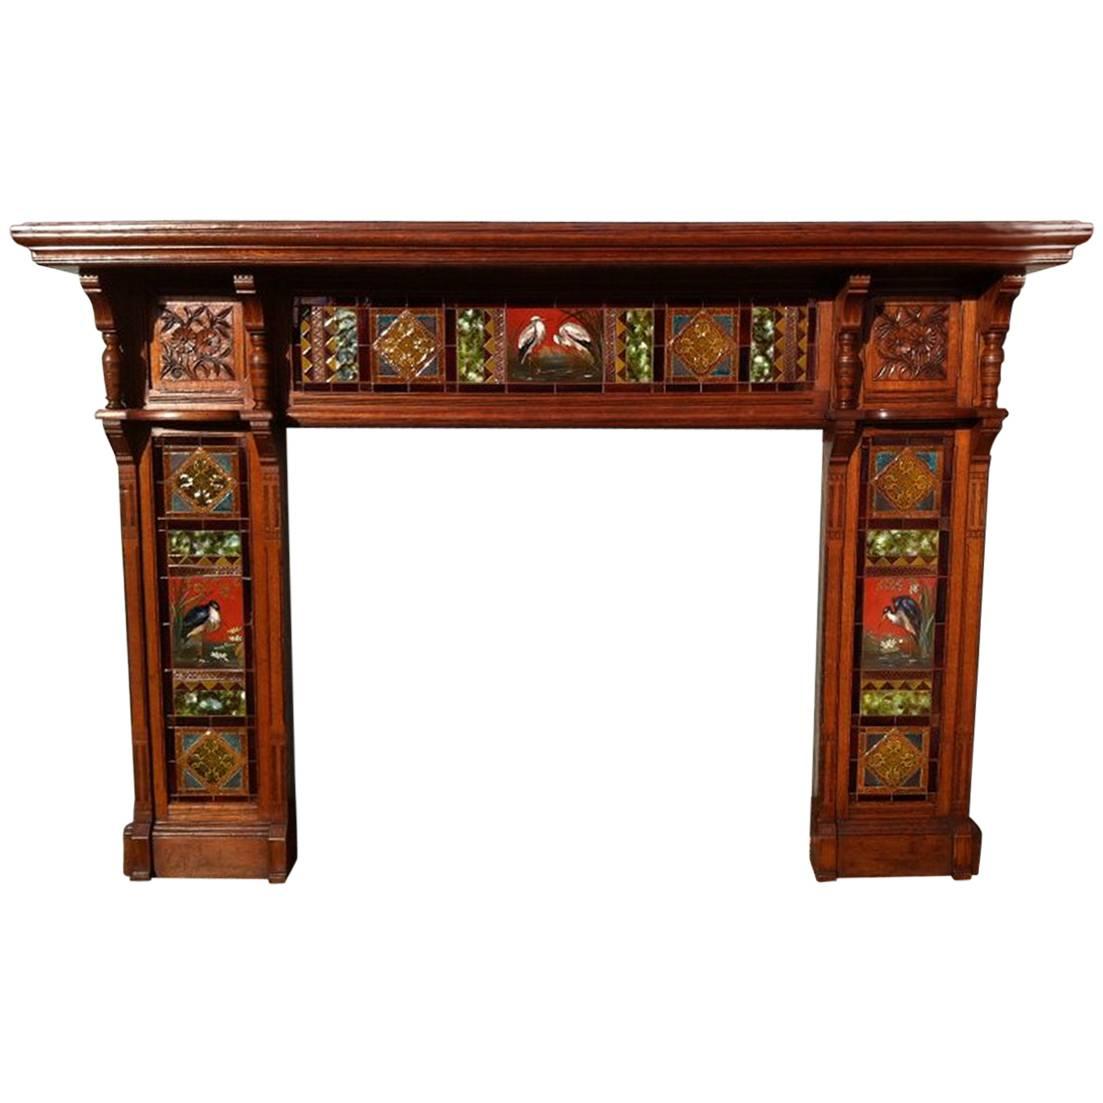 Impressive Gothic Revival Oak Fireplace Surround Attributed to Bruce Talbert